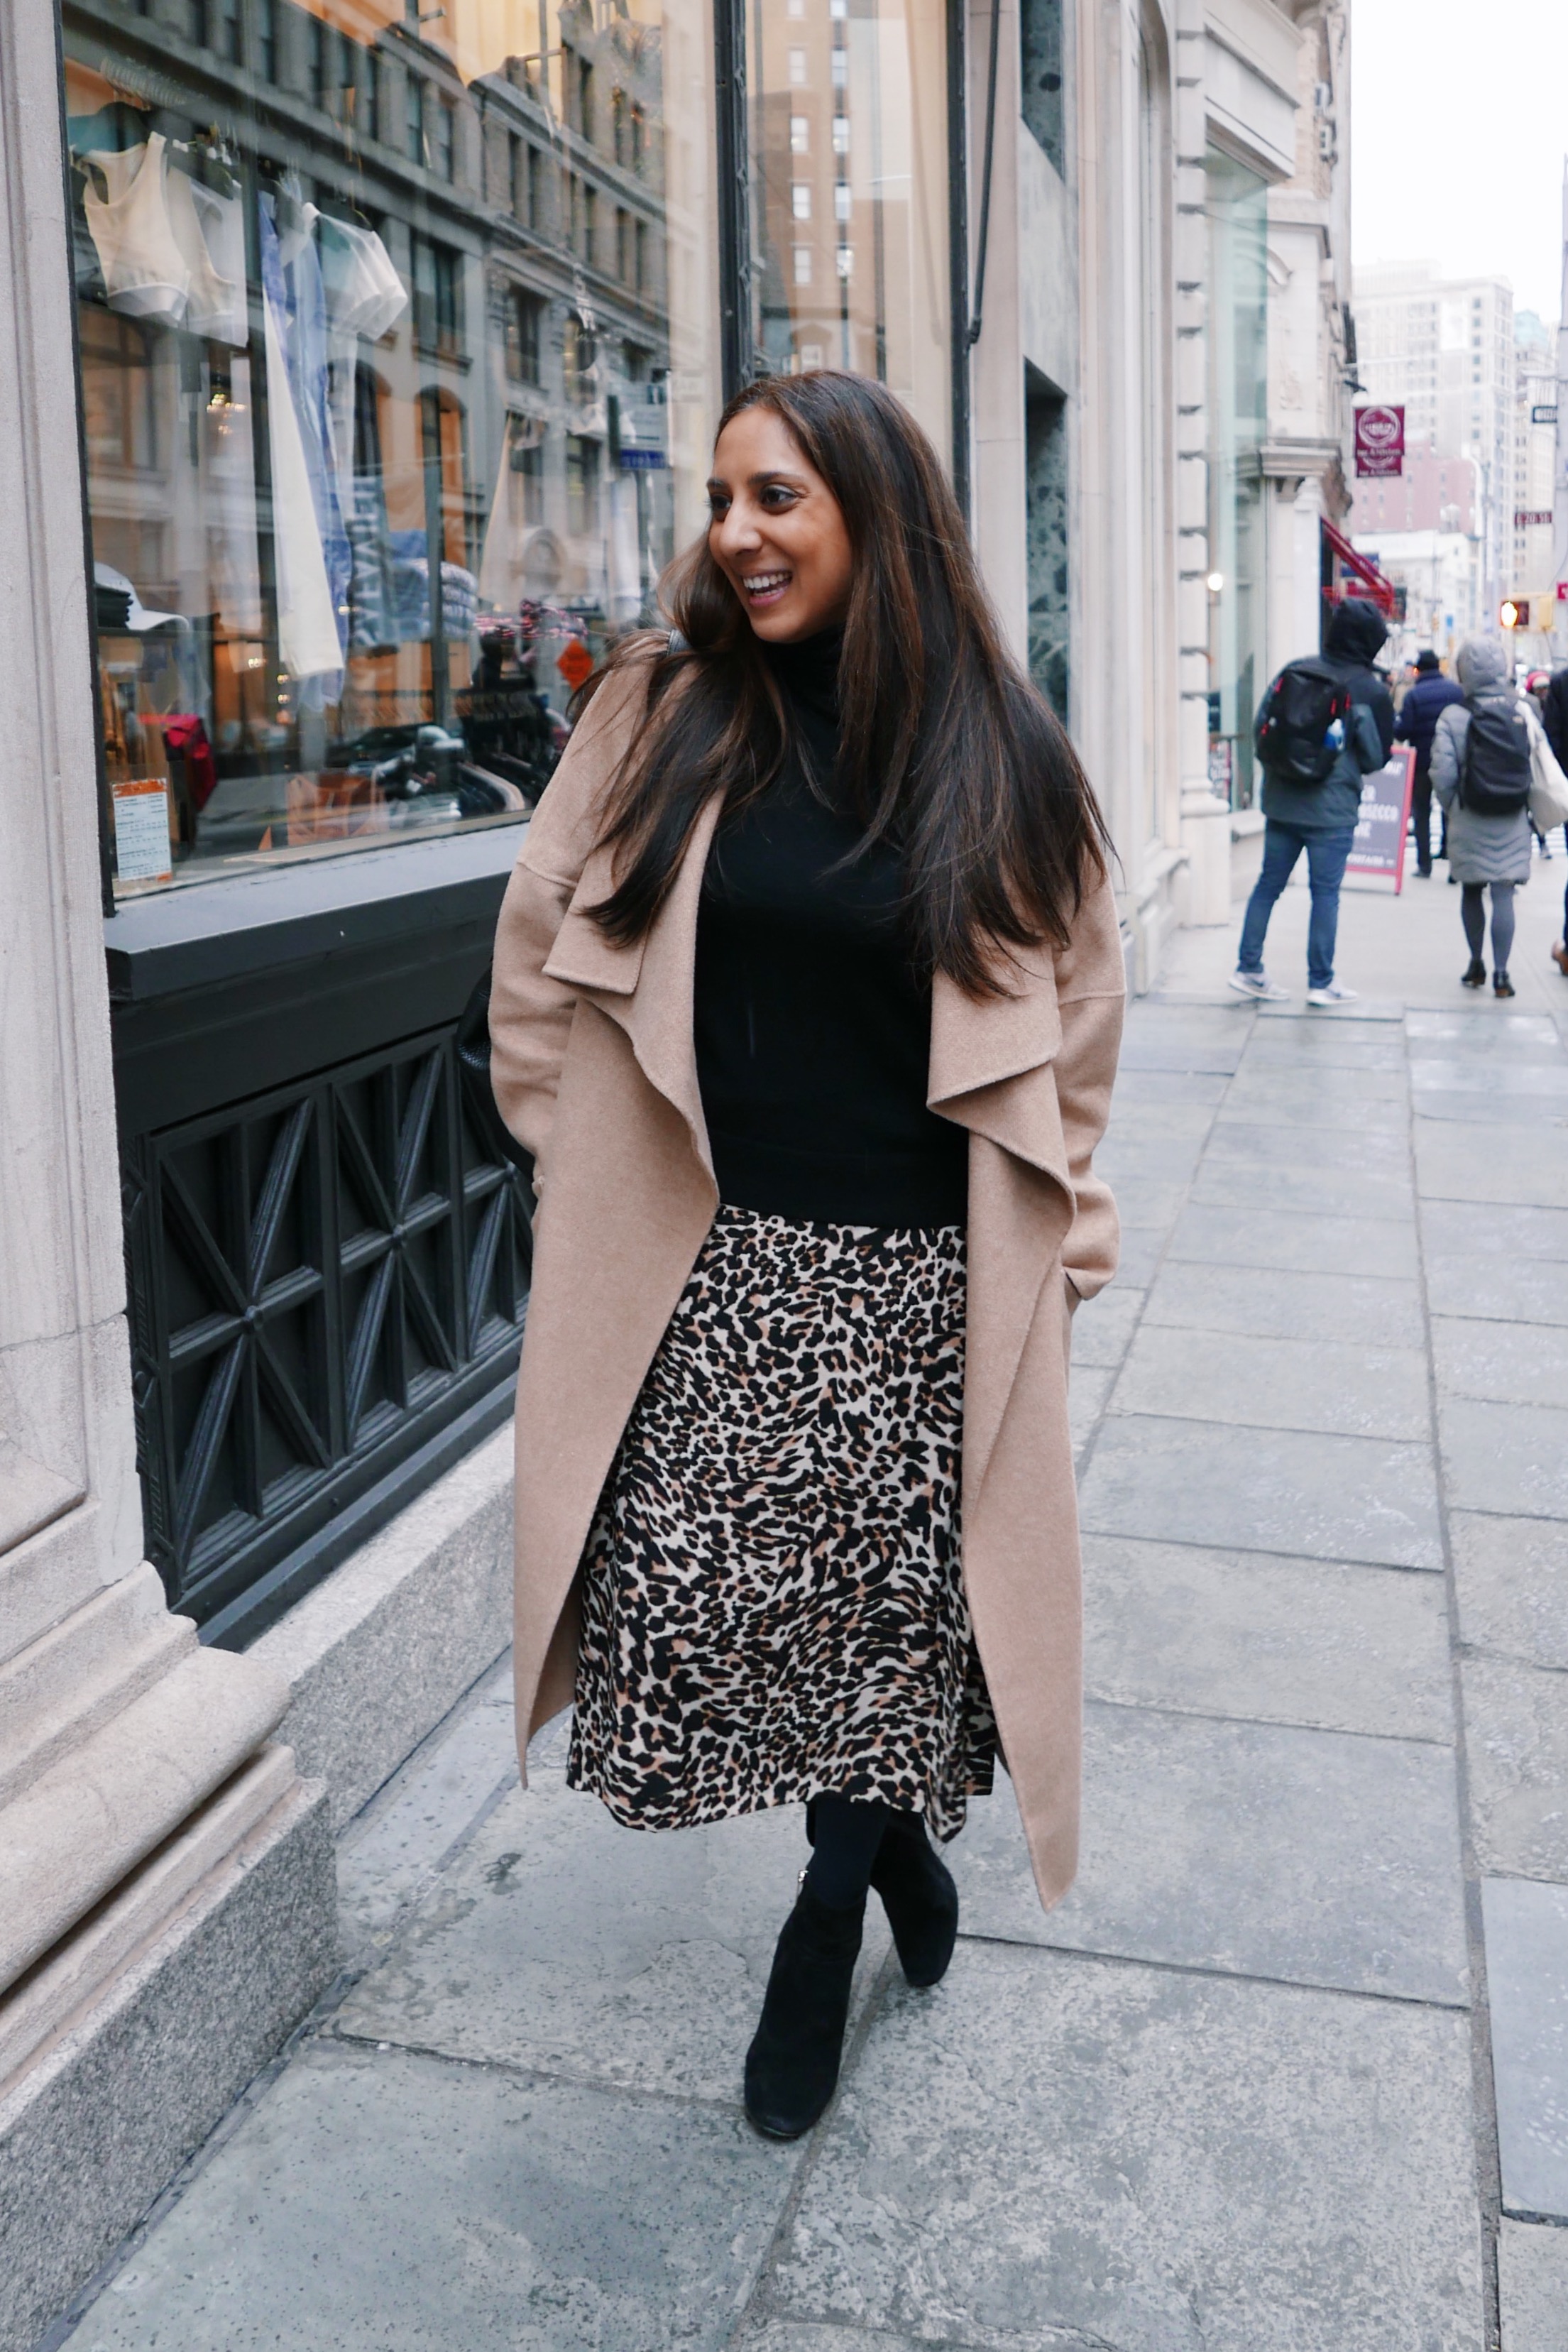 How To Style A Leopard Print Skirt For Work In The Winter